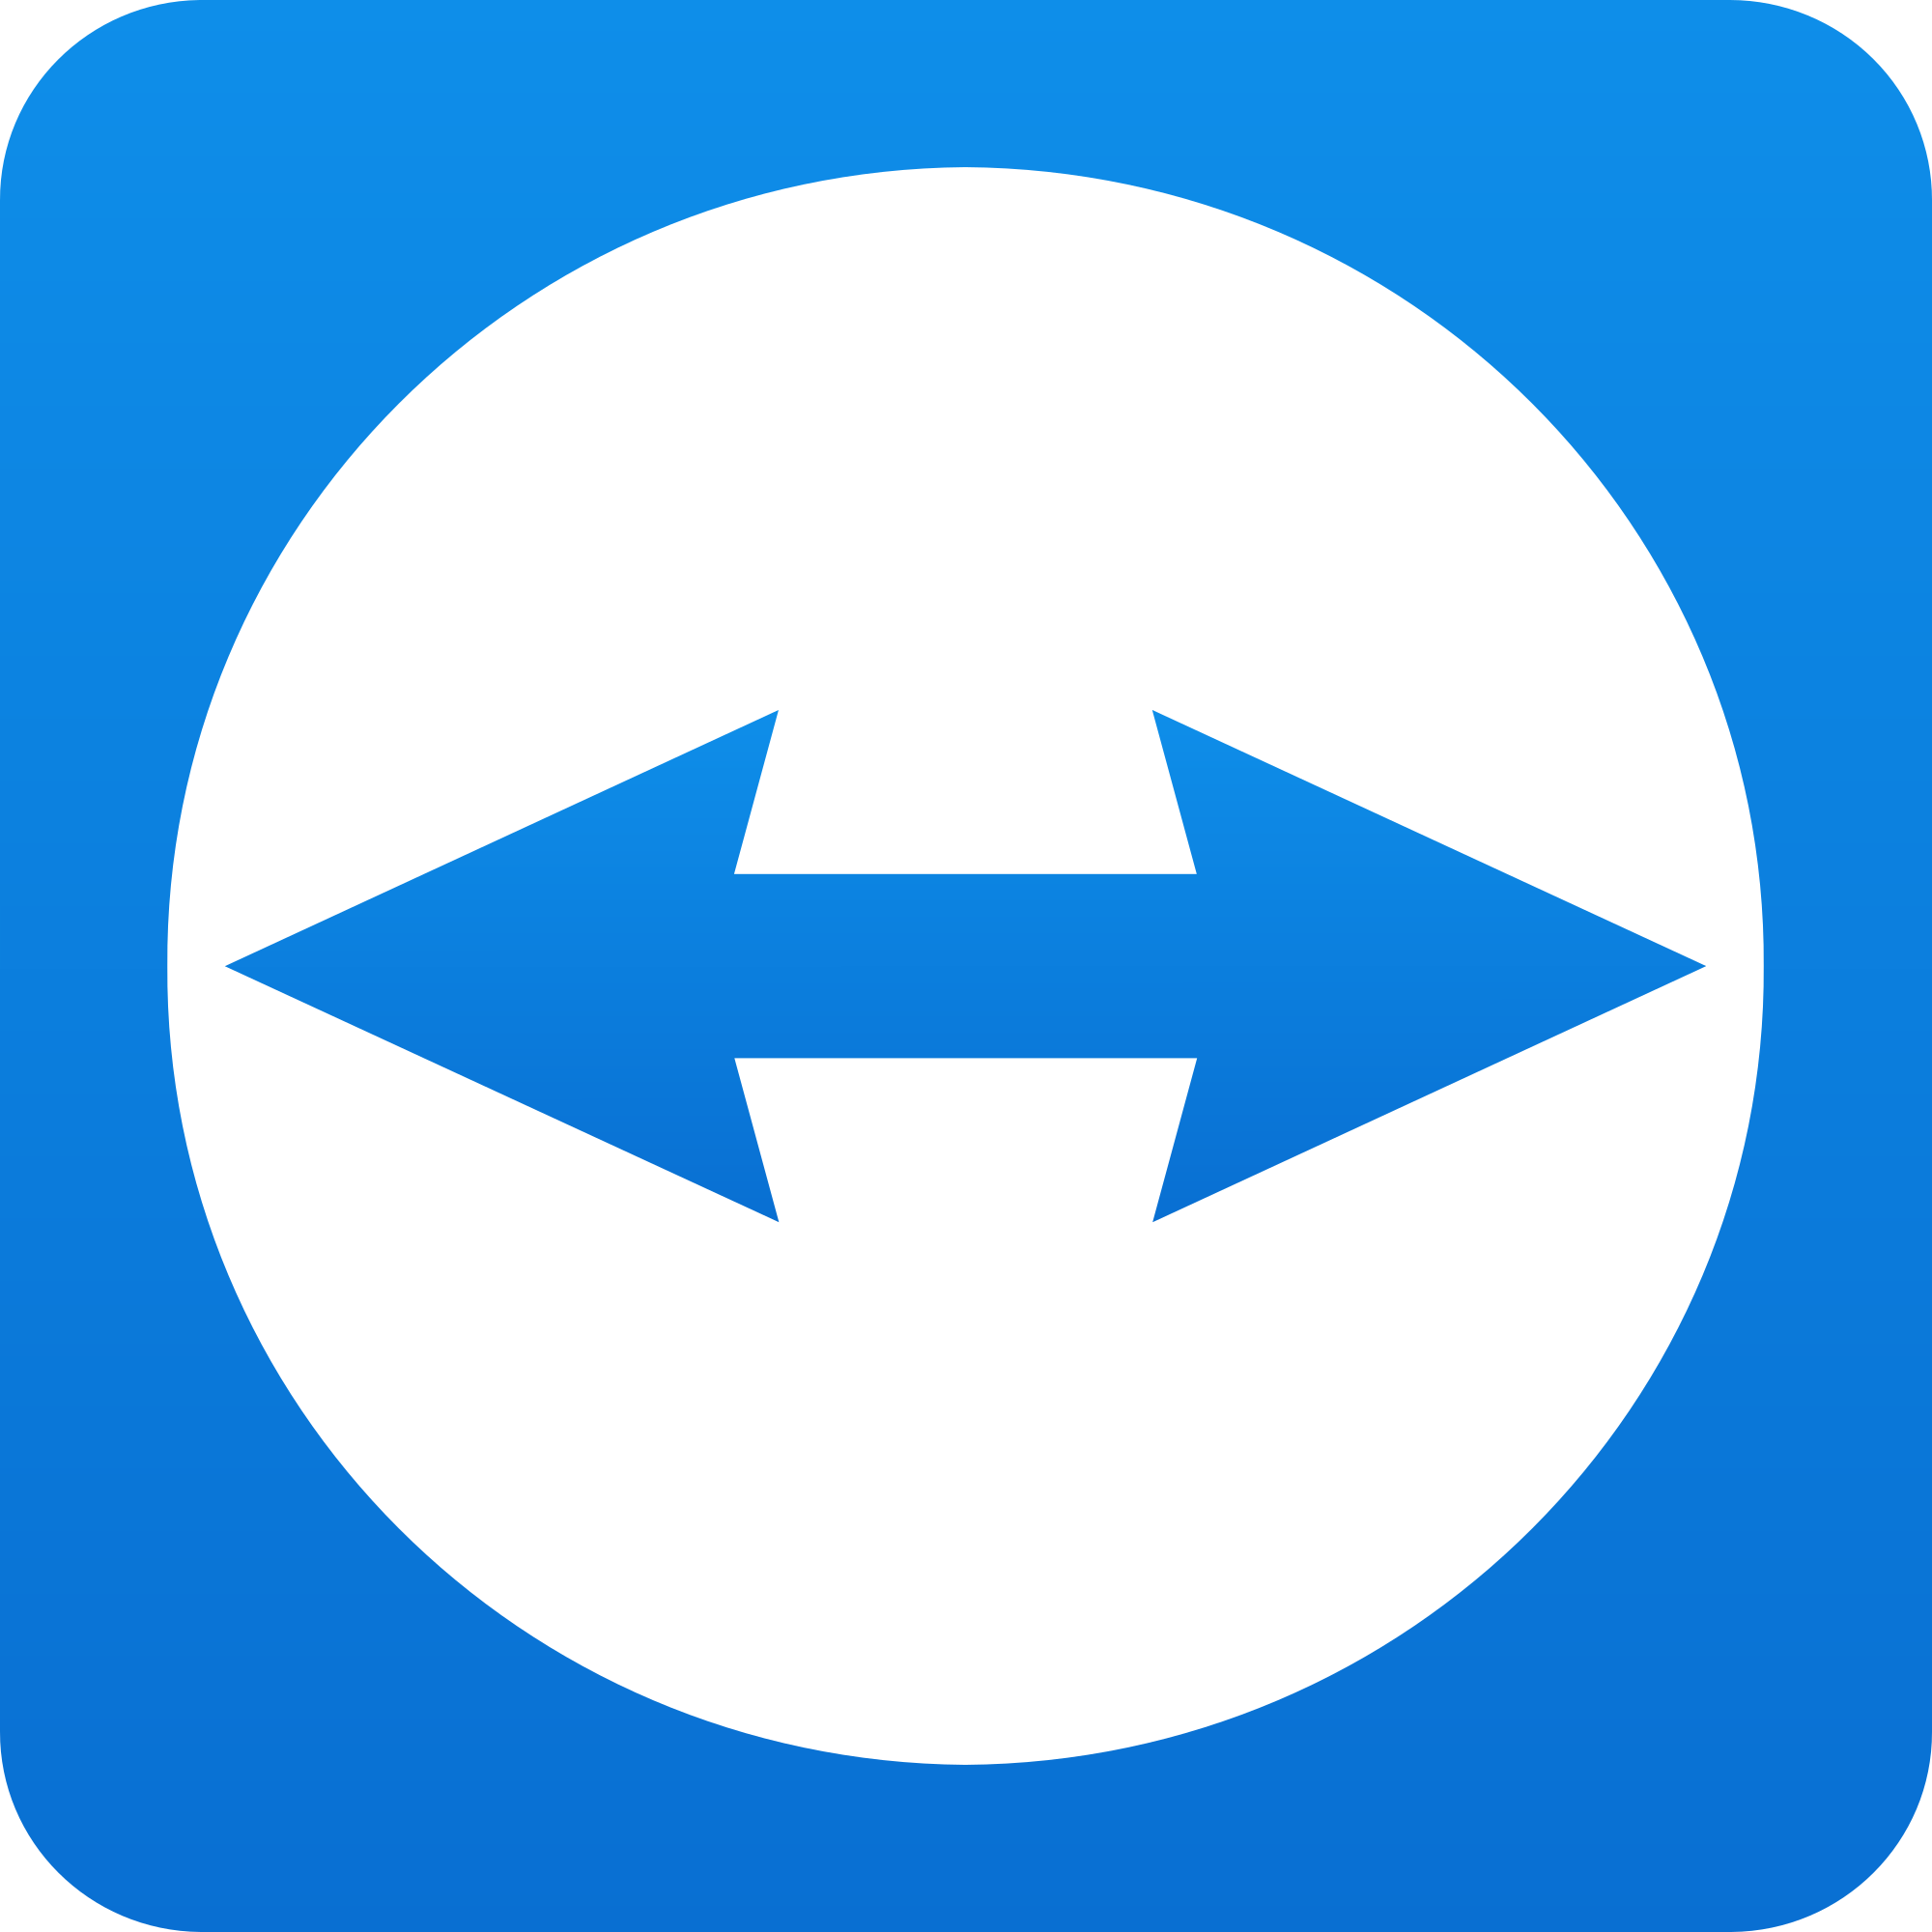 portable apps teamviewer download